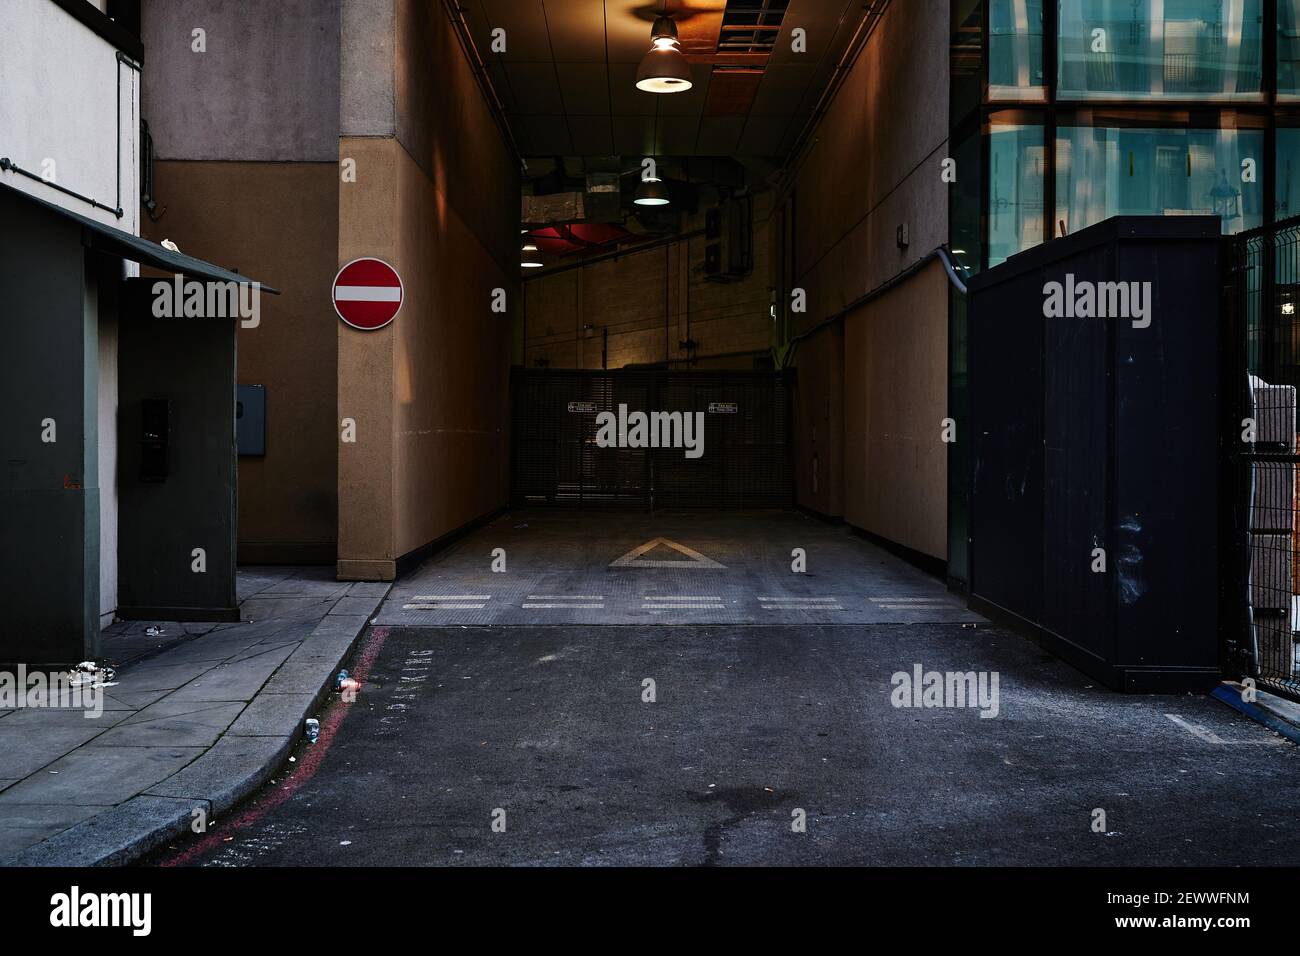 London, UK - 28 Feb 2021 : garage doorway in evening with a no entry sign Stock Photo